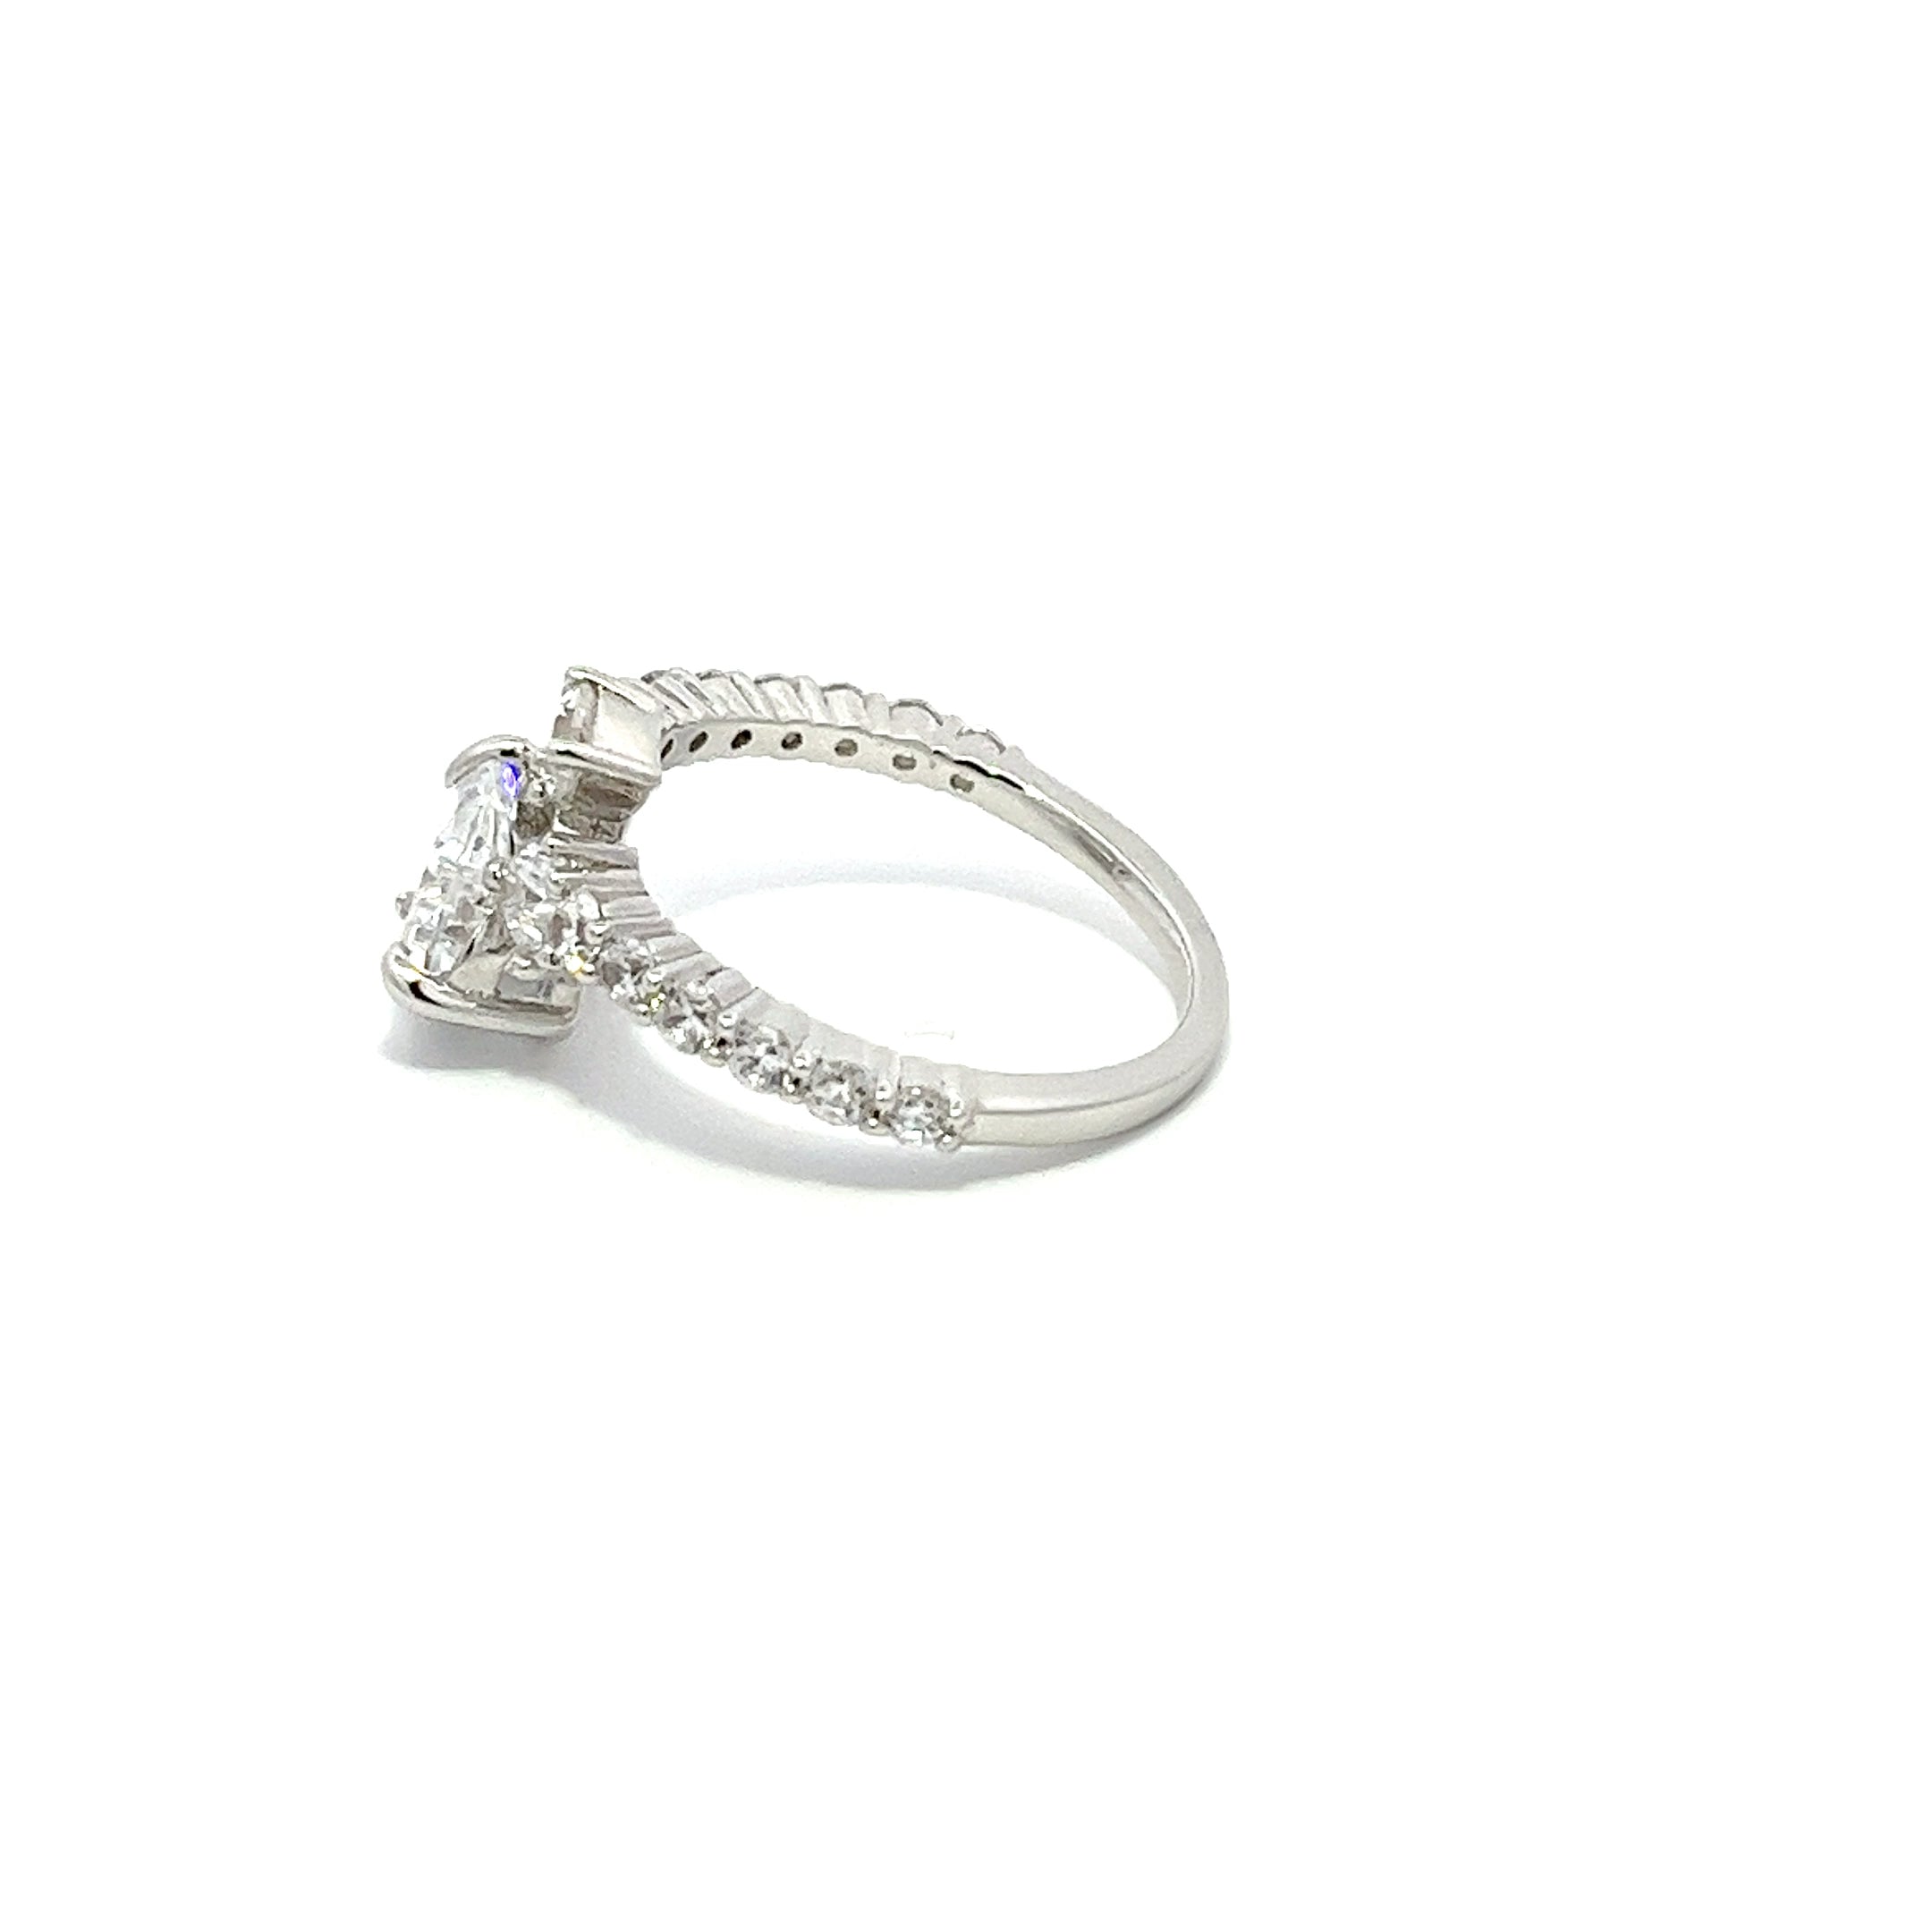 Serptentine Heart Silver Ring